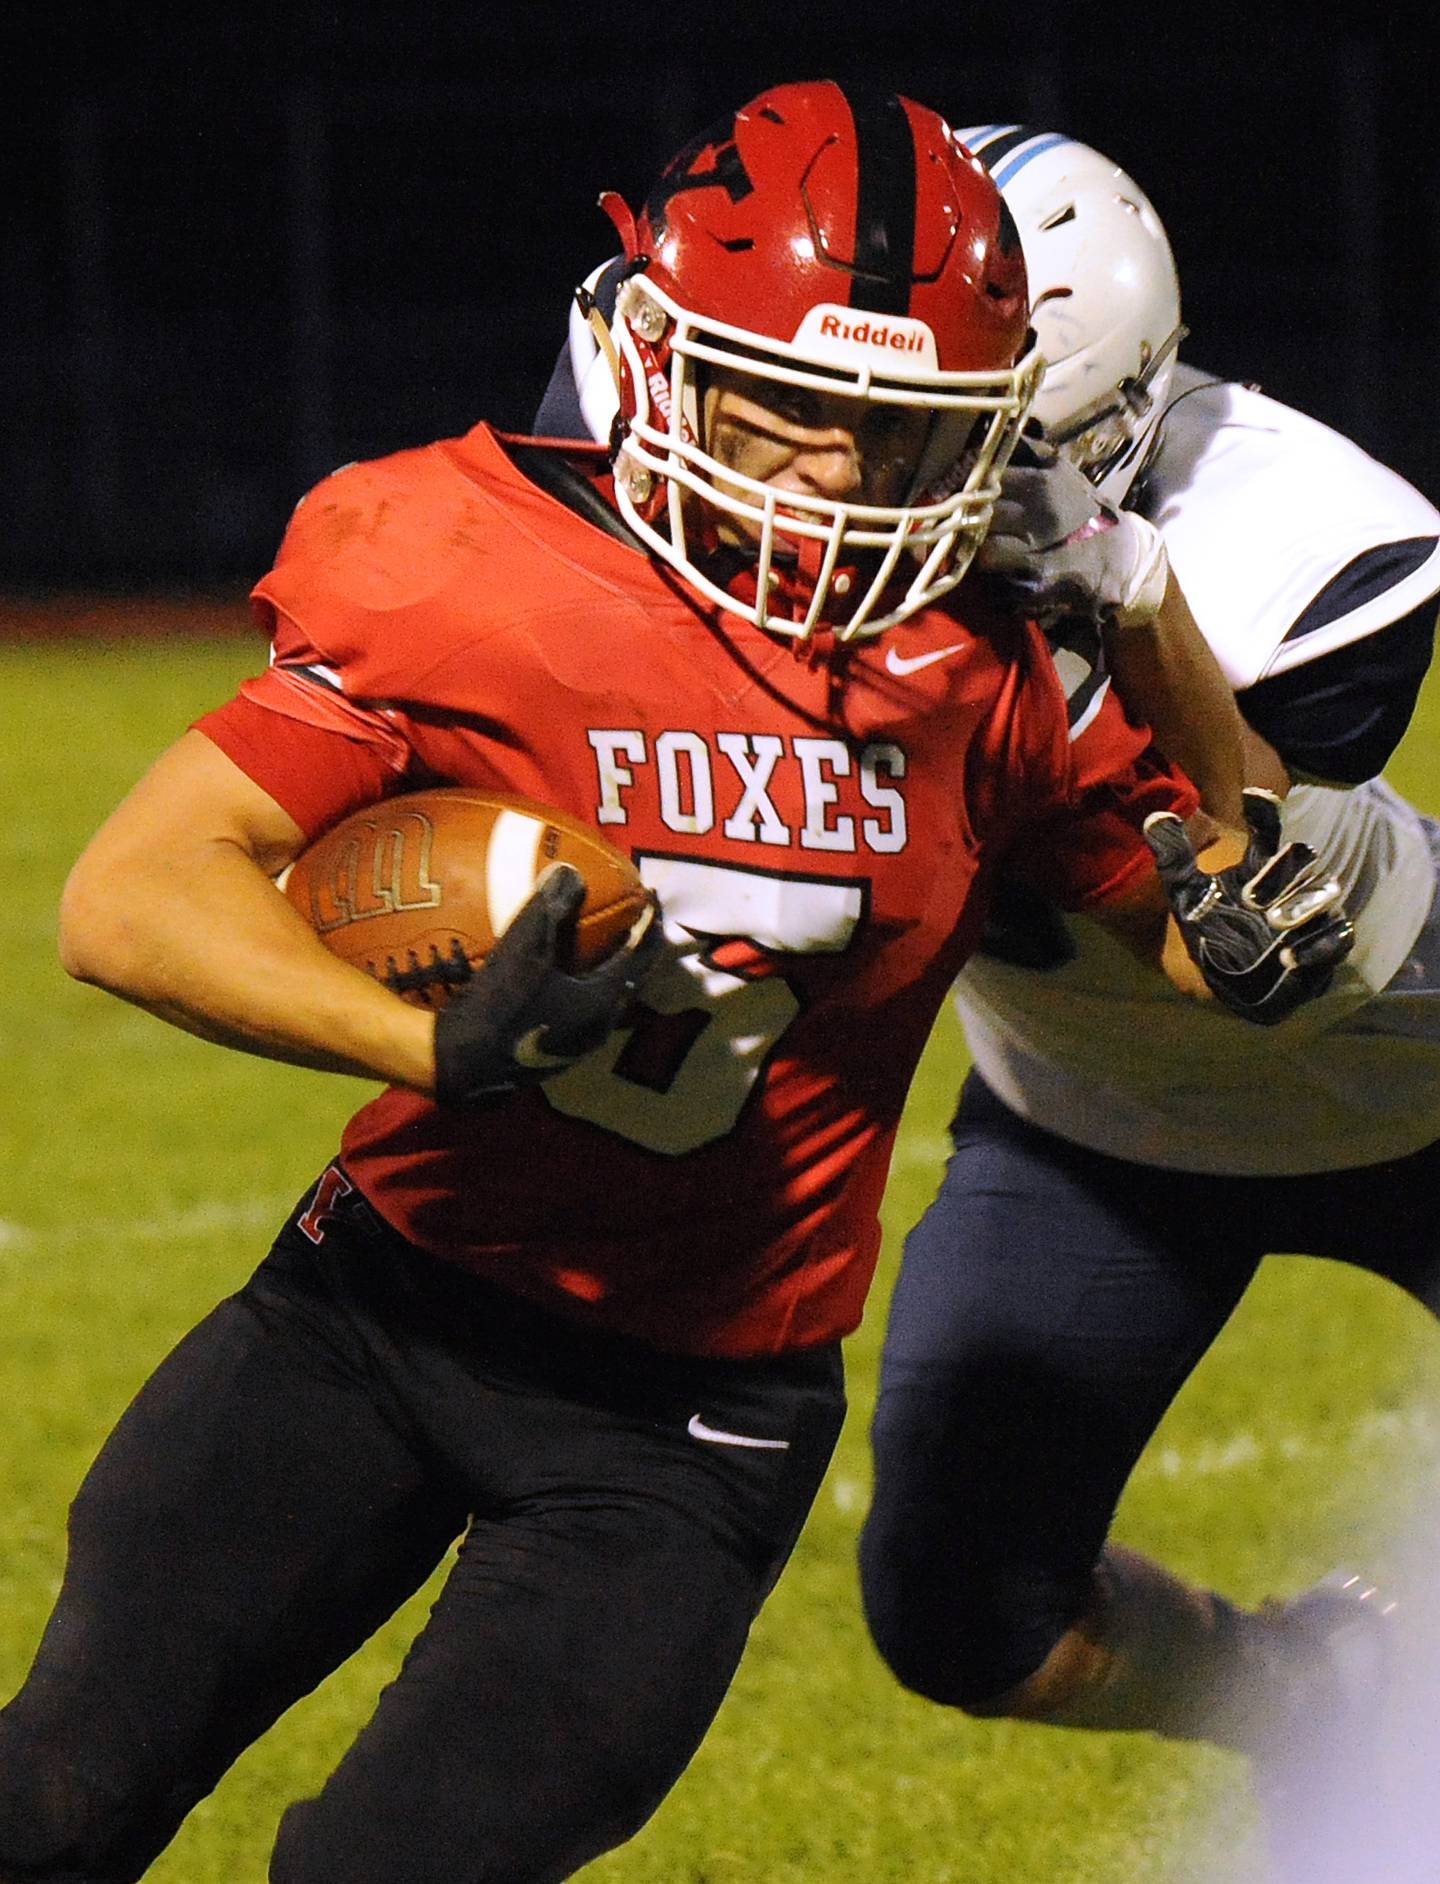 Yorkville defensive back Andrew Garton (5) advances an interception past Plainfield South wide receiver Aiden Sliwa (right) during a varsity football game at Yorkville High School on Friday.